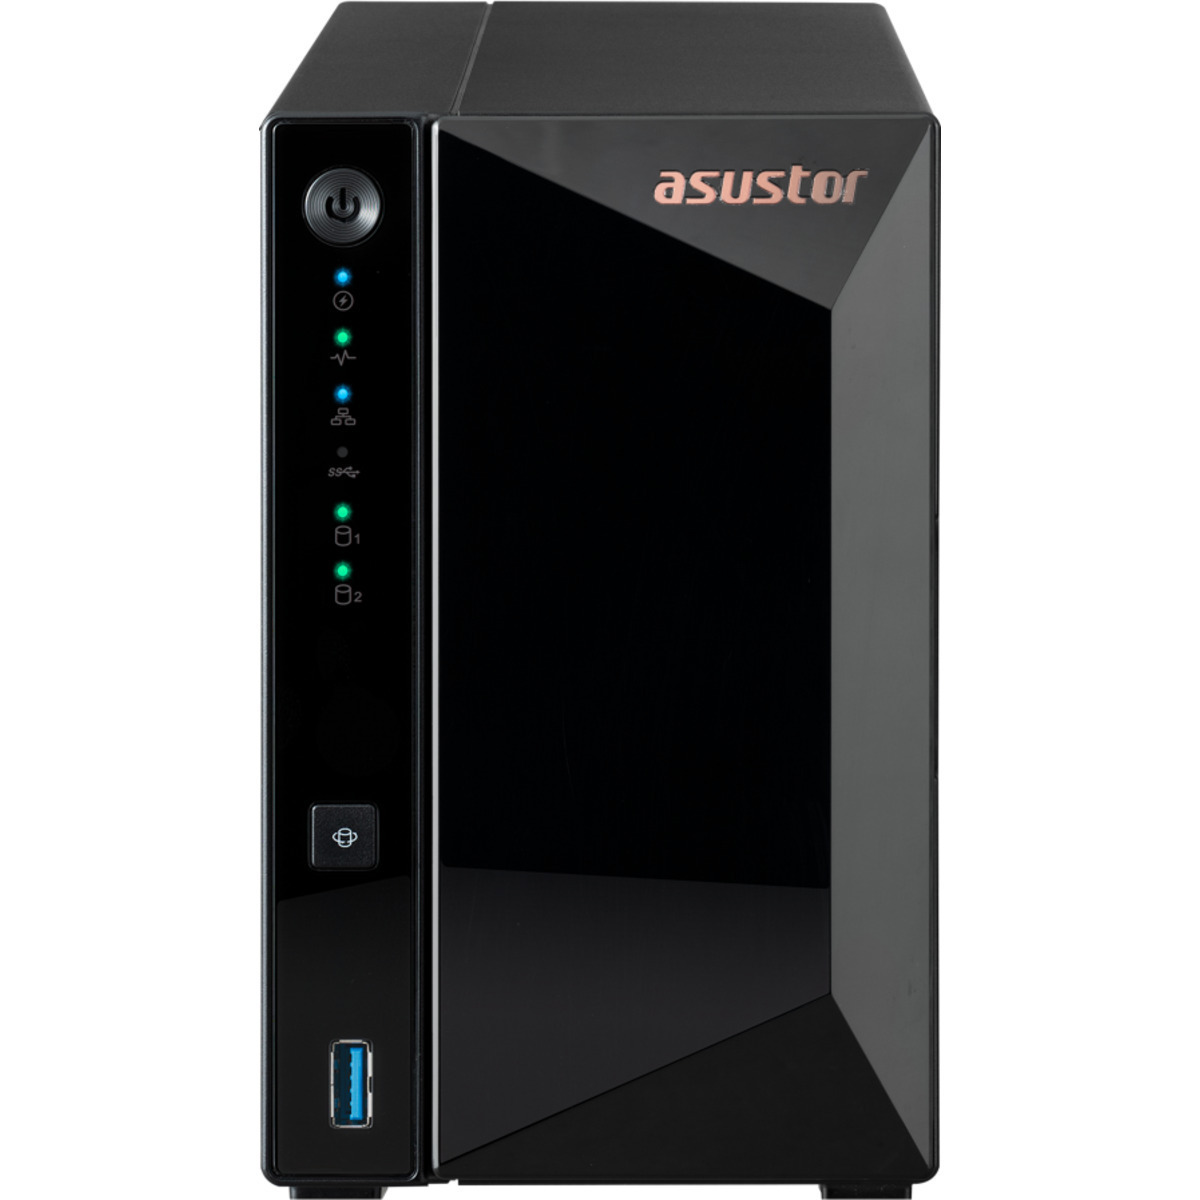 ASUSTOR DRIVESTOR 2 Pro AS3302T 12tb 2-Bay Desktop Personal / Basic Home / Small Office NAS - Network Attached Storage Device 2x6tb Western Digital Red Plus WD60EFPX 3.5 5640rpm SATA 6Gb/s HDD NAS Class Drives Installed - Burn-In Tested DRIVESTOR 2 Pro AS3302T